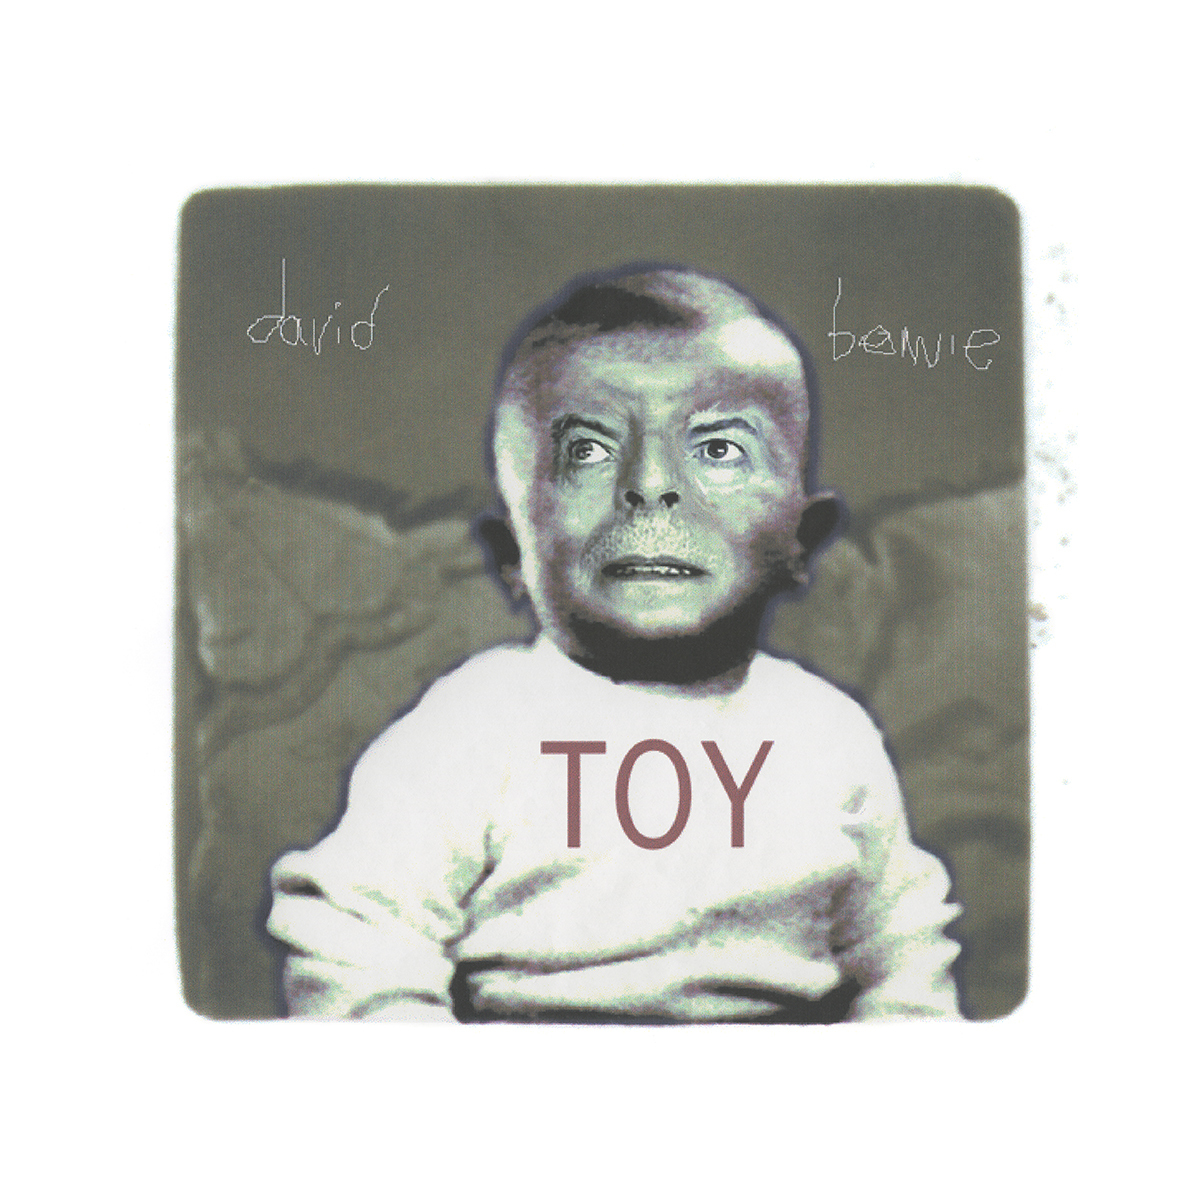 Bowie - Toy